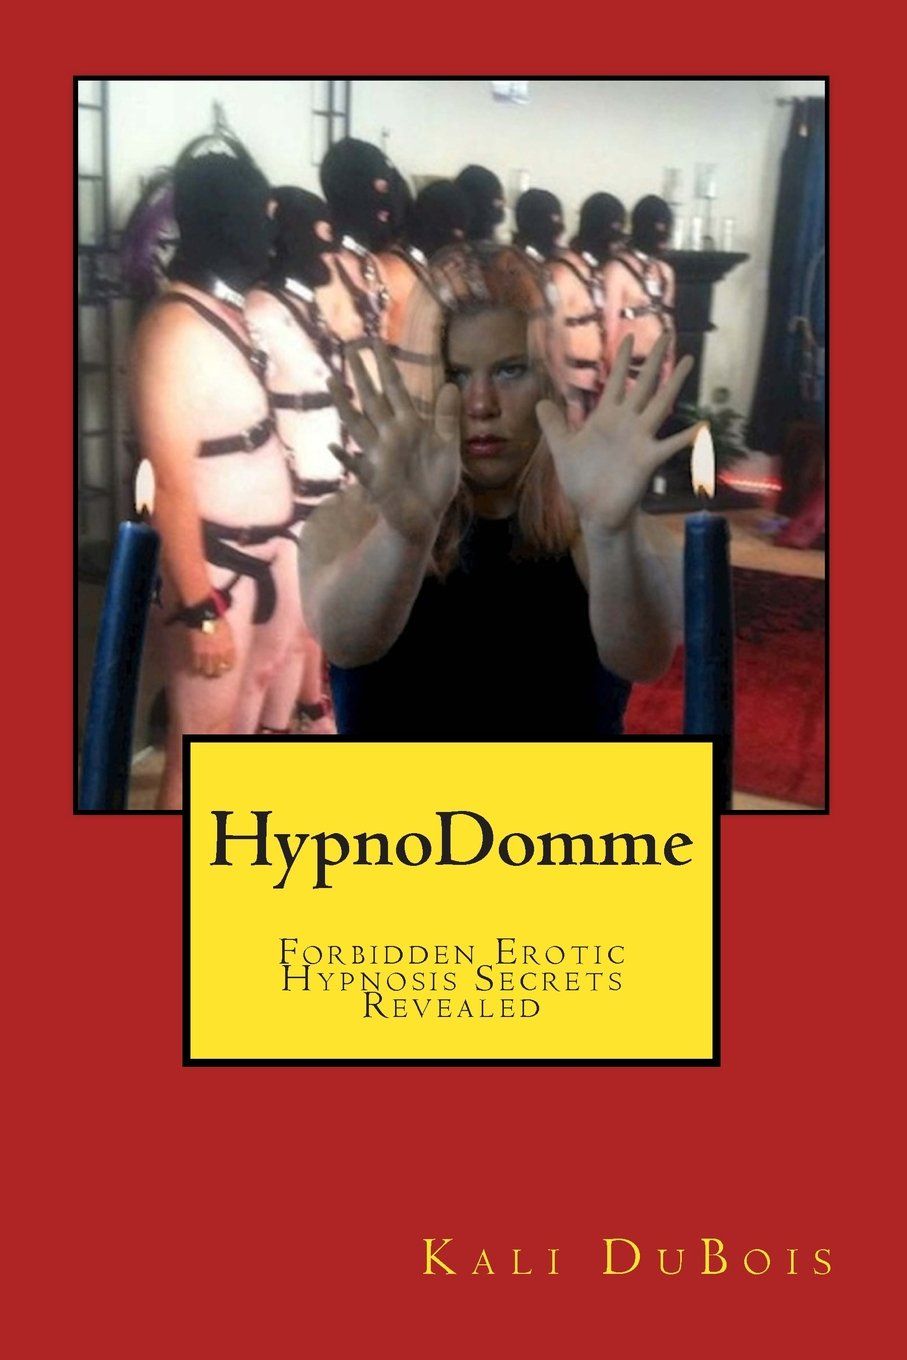 Daffy reccomend Erotic hypnosis review